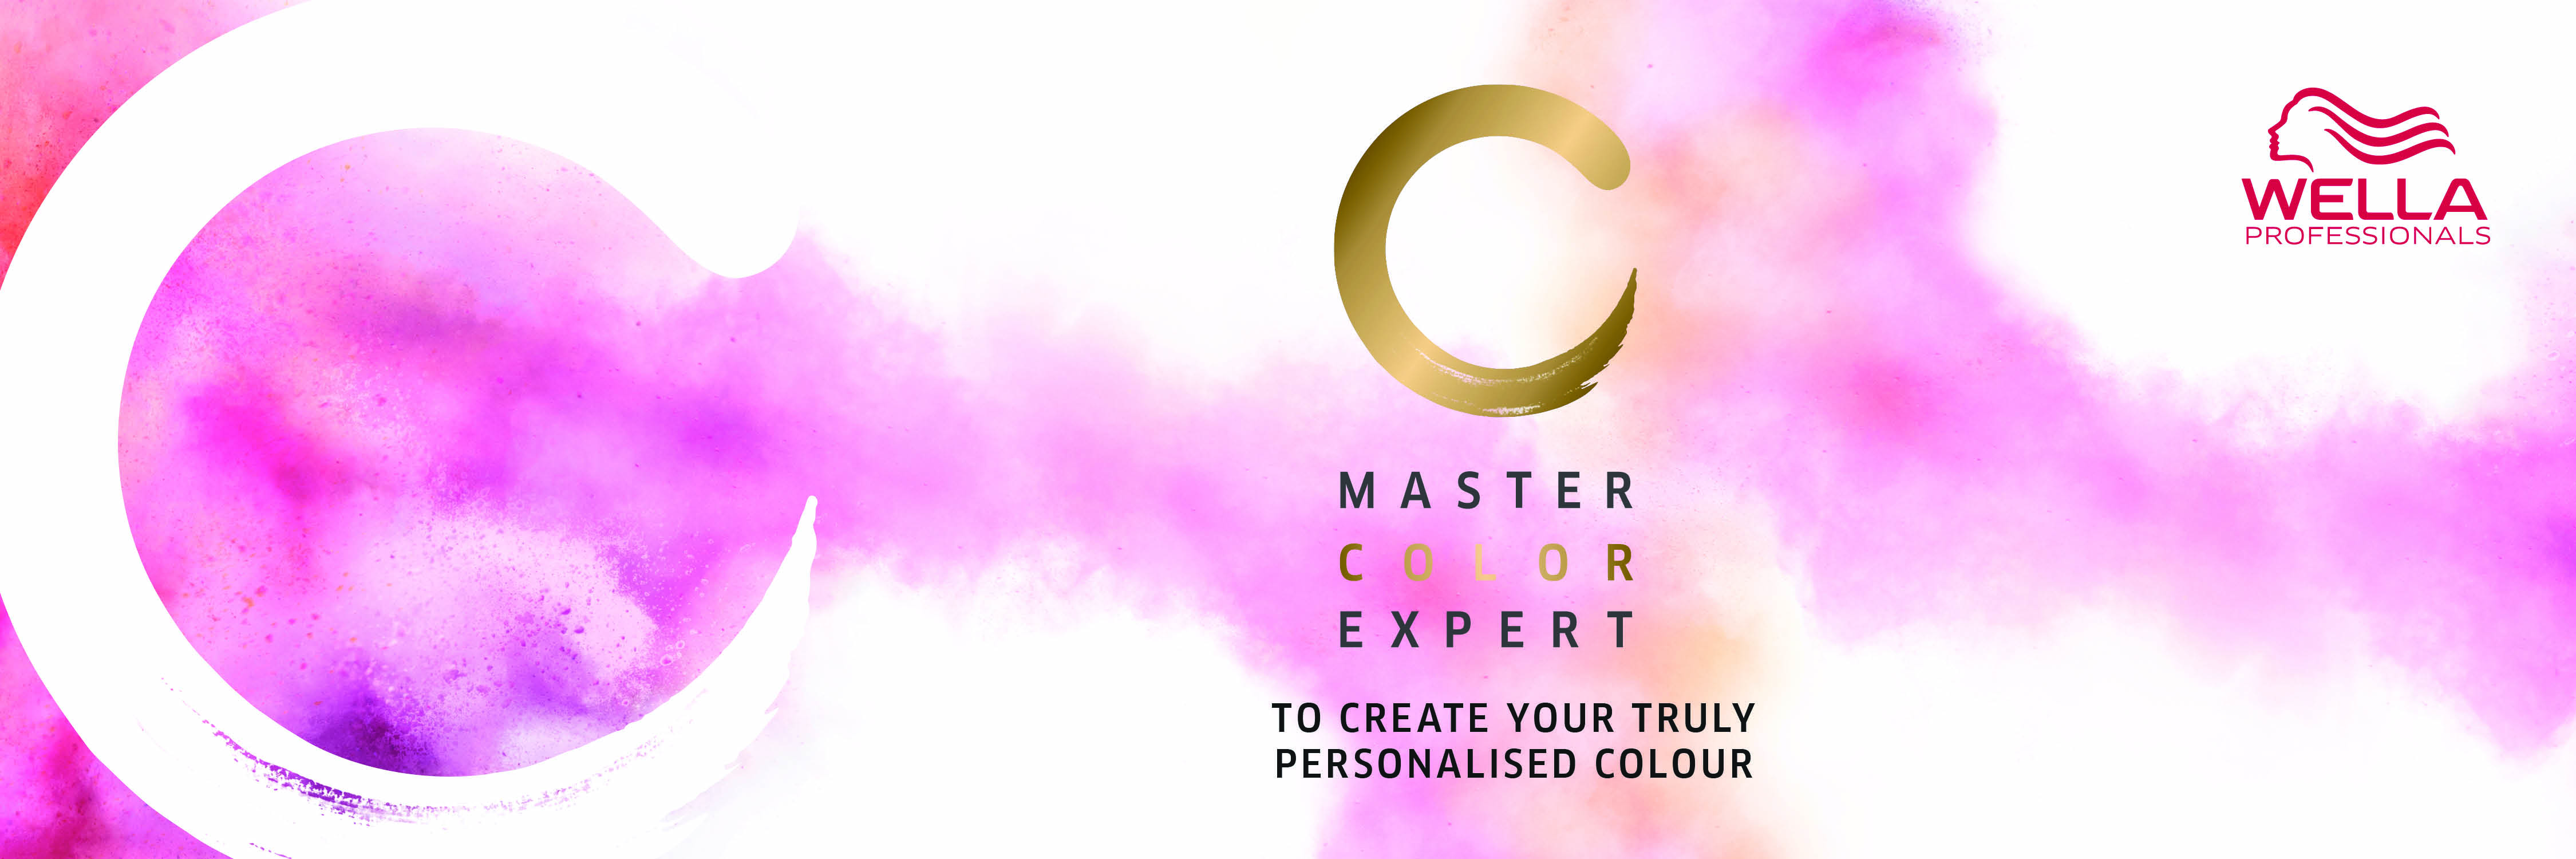 color expert